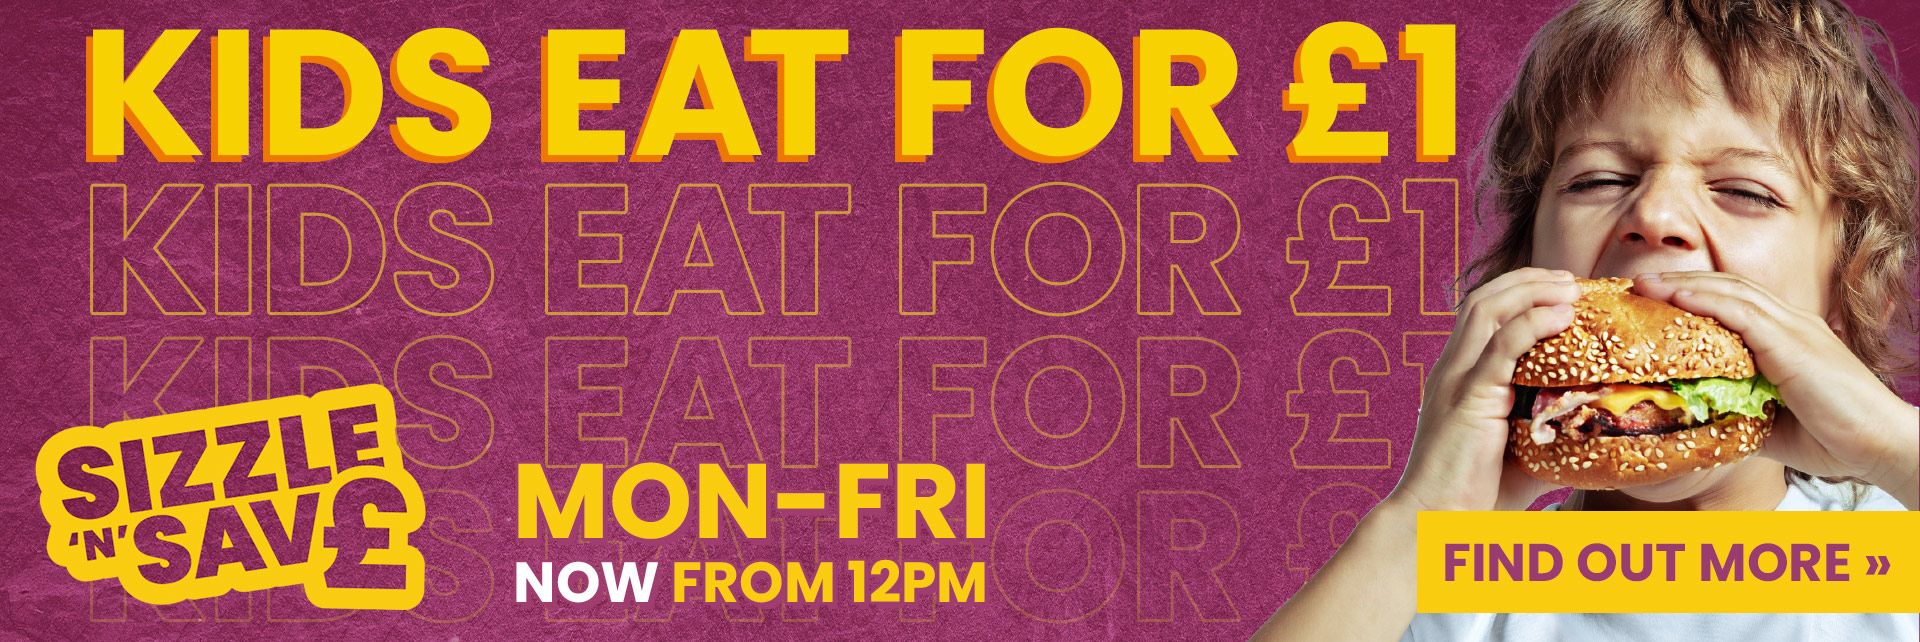 Kids eat for £1 at The Yenton